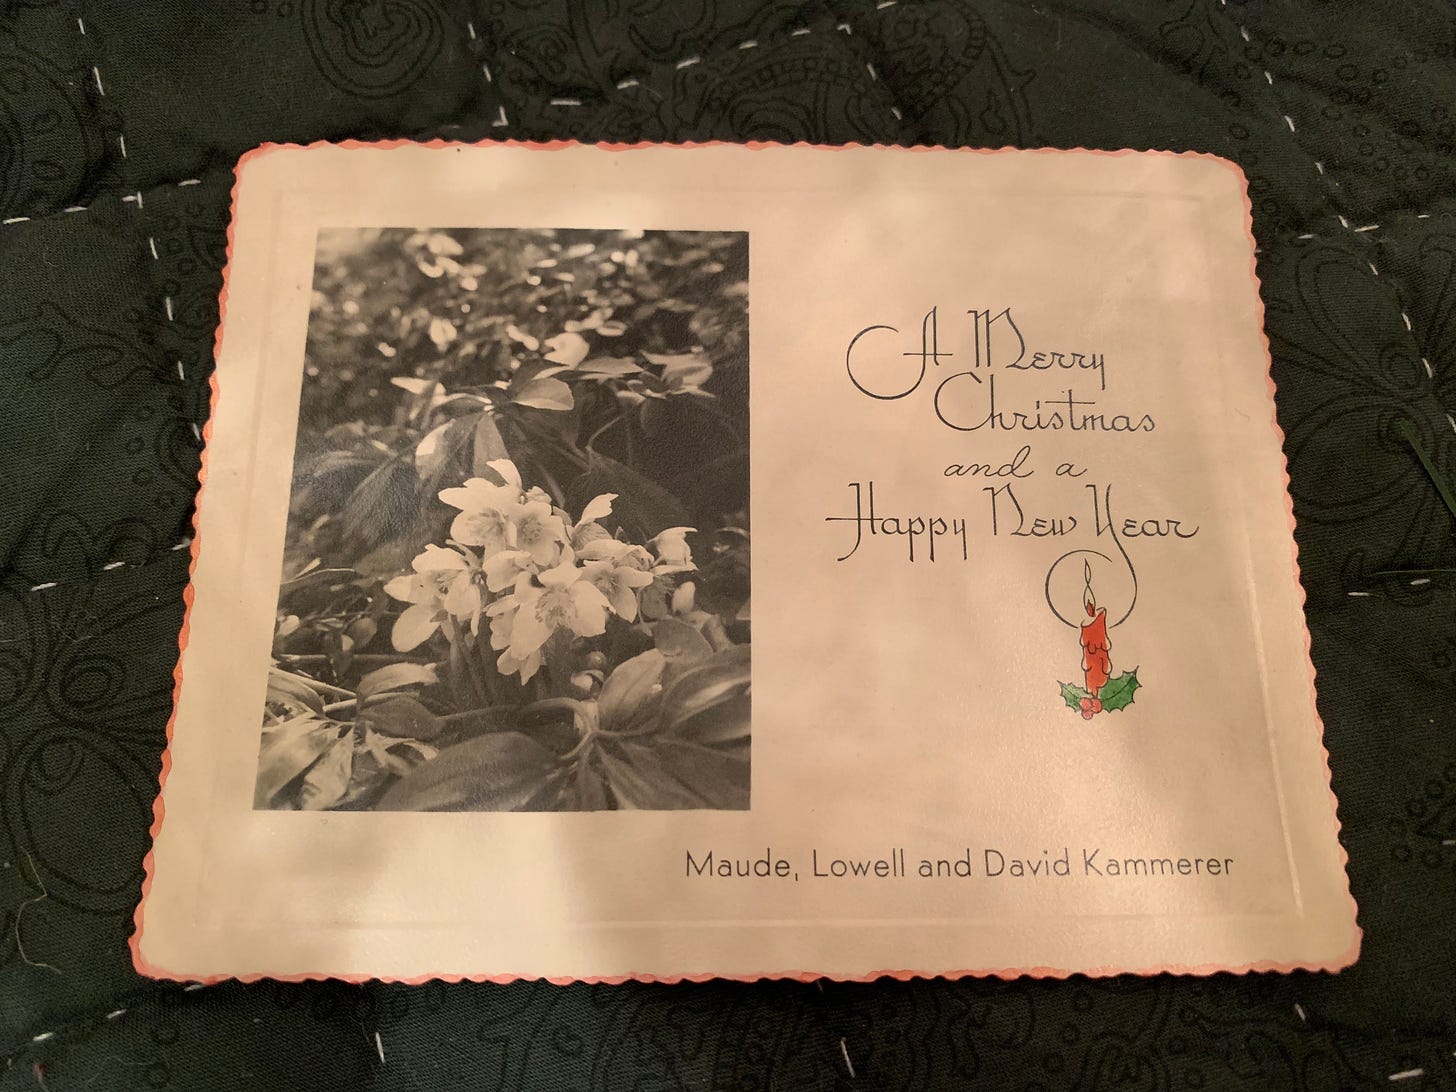 White cardstock with scalloped edge dipped in red ink. On the left is a photo of ovate leaves with a small clump of blooms. On the right text reads “A Merry Christmas and a Happy New Year, Maude, Lowell and David Kammerer”